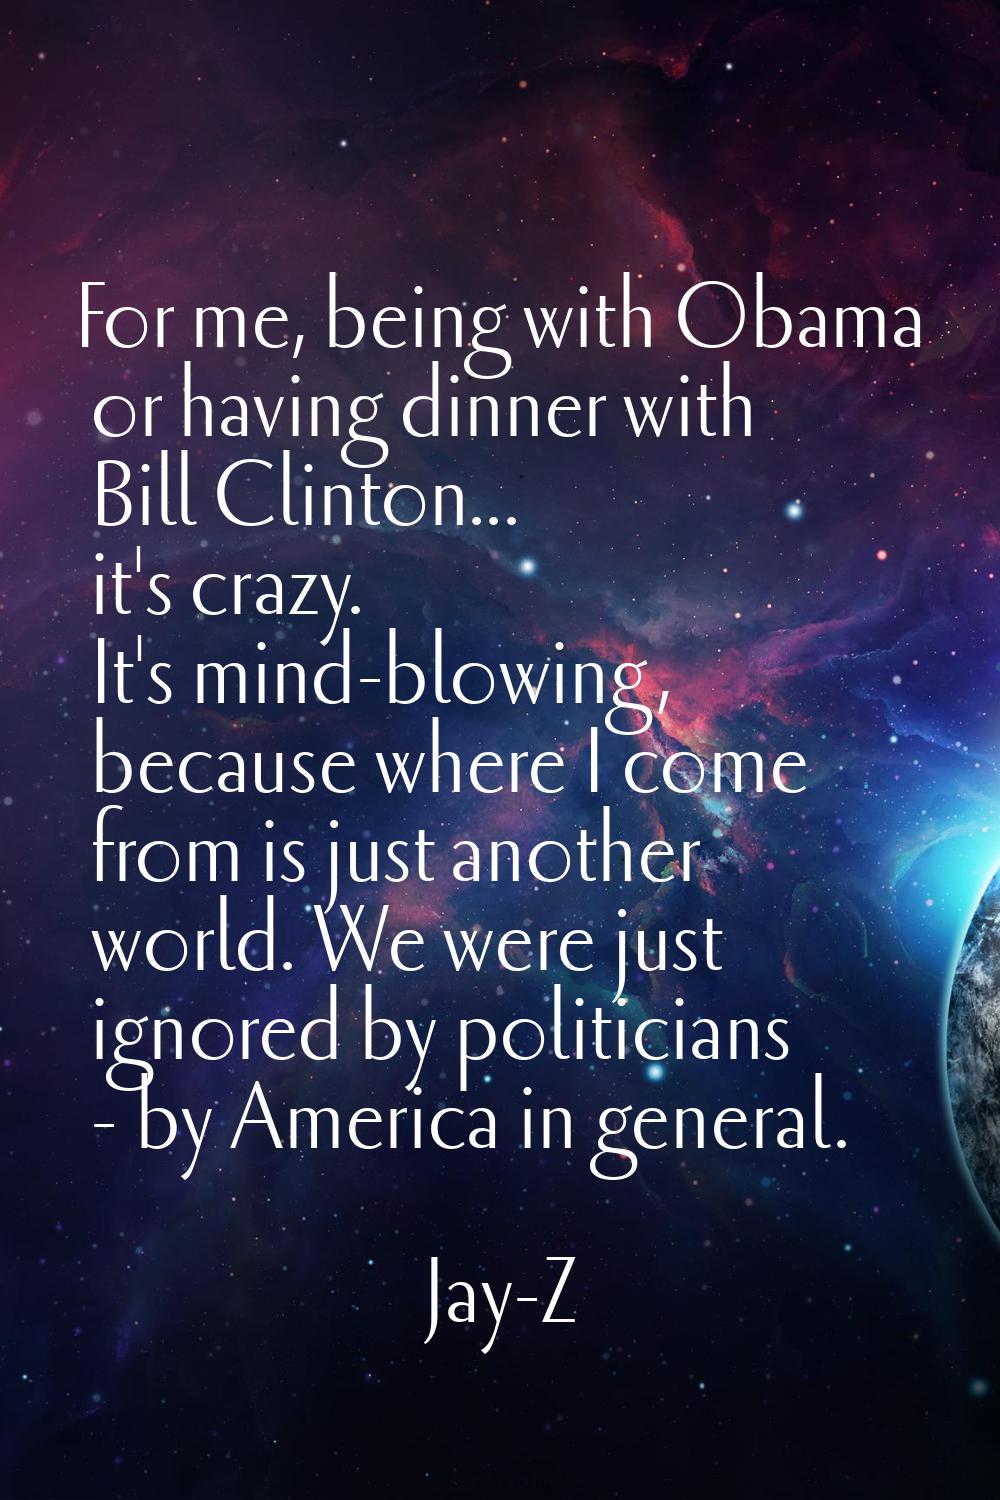 For me, being with Obama or having dinner with Bill Clinton... it's crazy. It's mind-blowing, becau